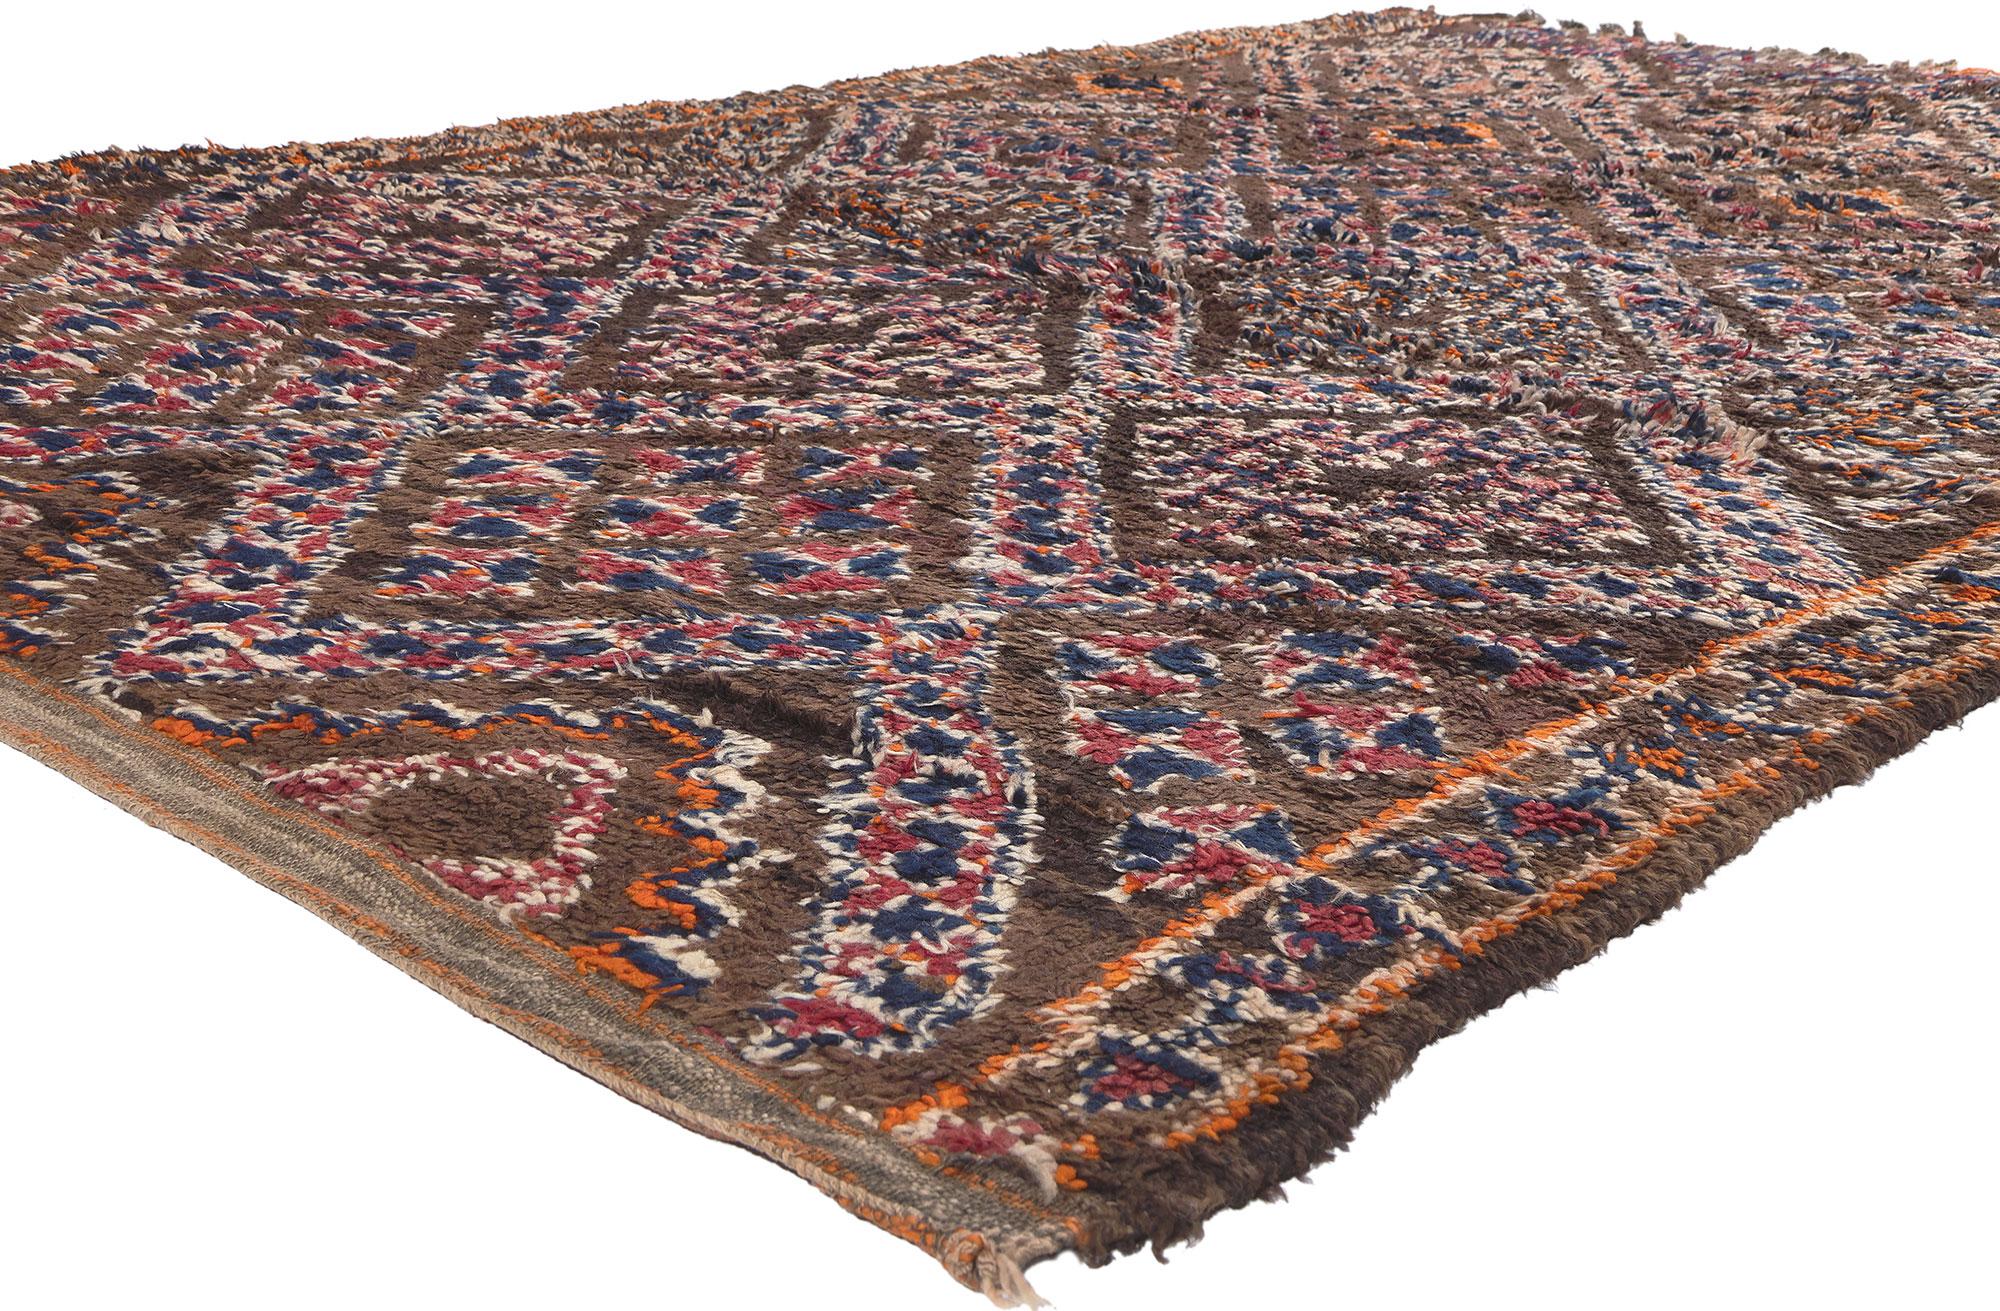 21024 Vintage Brown Beni MGuild Moroccan Rug, 06'05 x 11'00. Prepare for a mesmerizing adventure whisked away by the warm embrace of this hand knotted wool vintage Beni MGuild Moroccan rug. This enchanting Berber carpet will transport you to a world